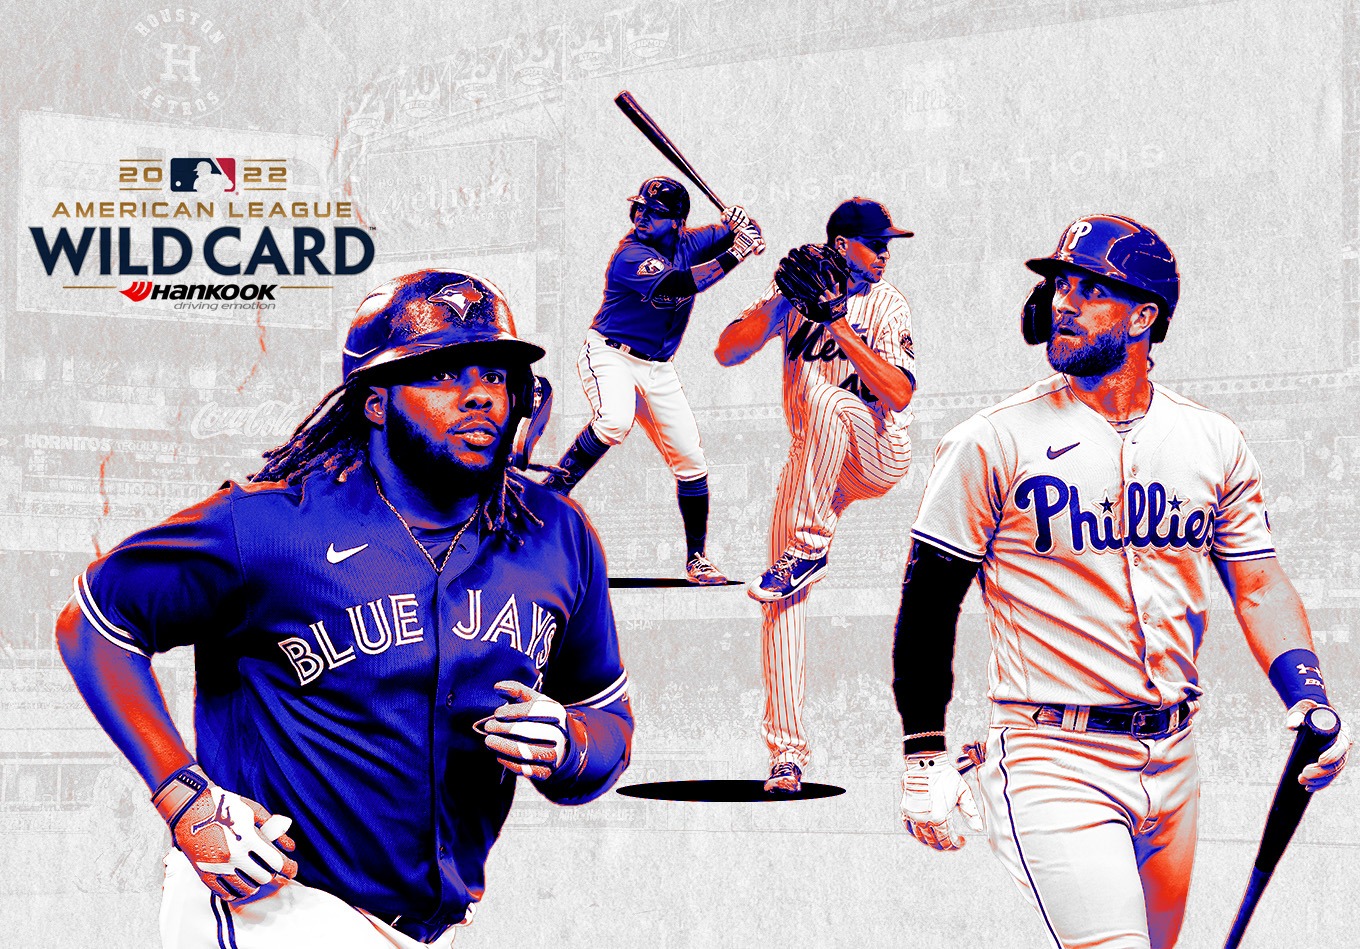 MLB Playoffs: Which Teams Have the Edge in Each Wild Card Series?